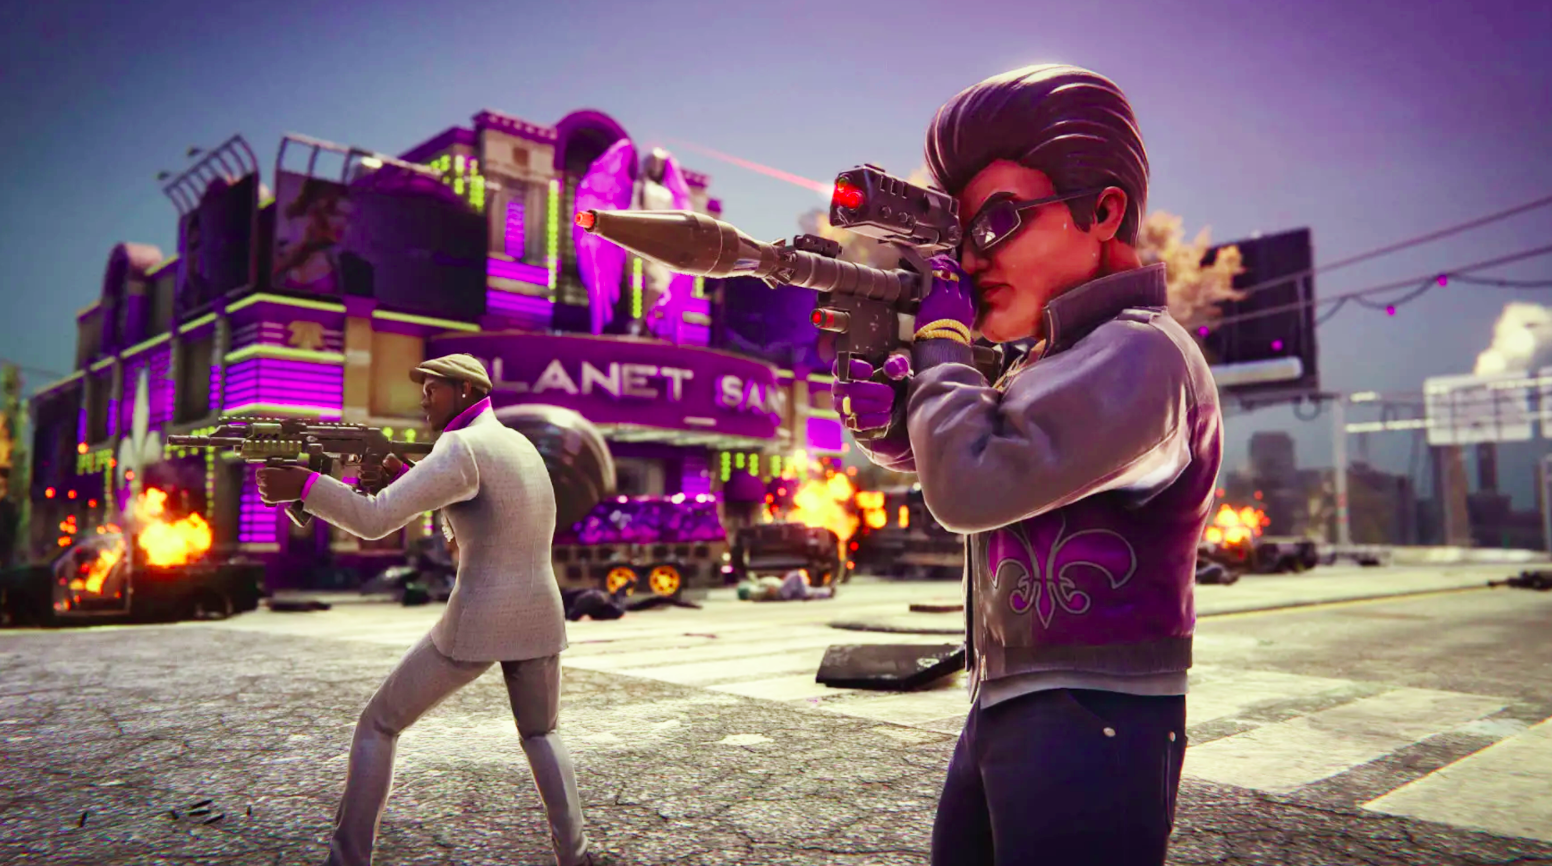 Saints Row is getting a reboot that'll be out in February 2022 - The Verge